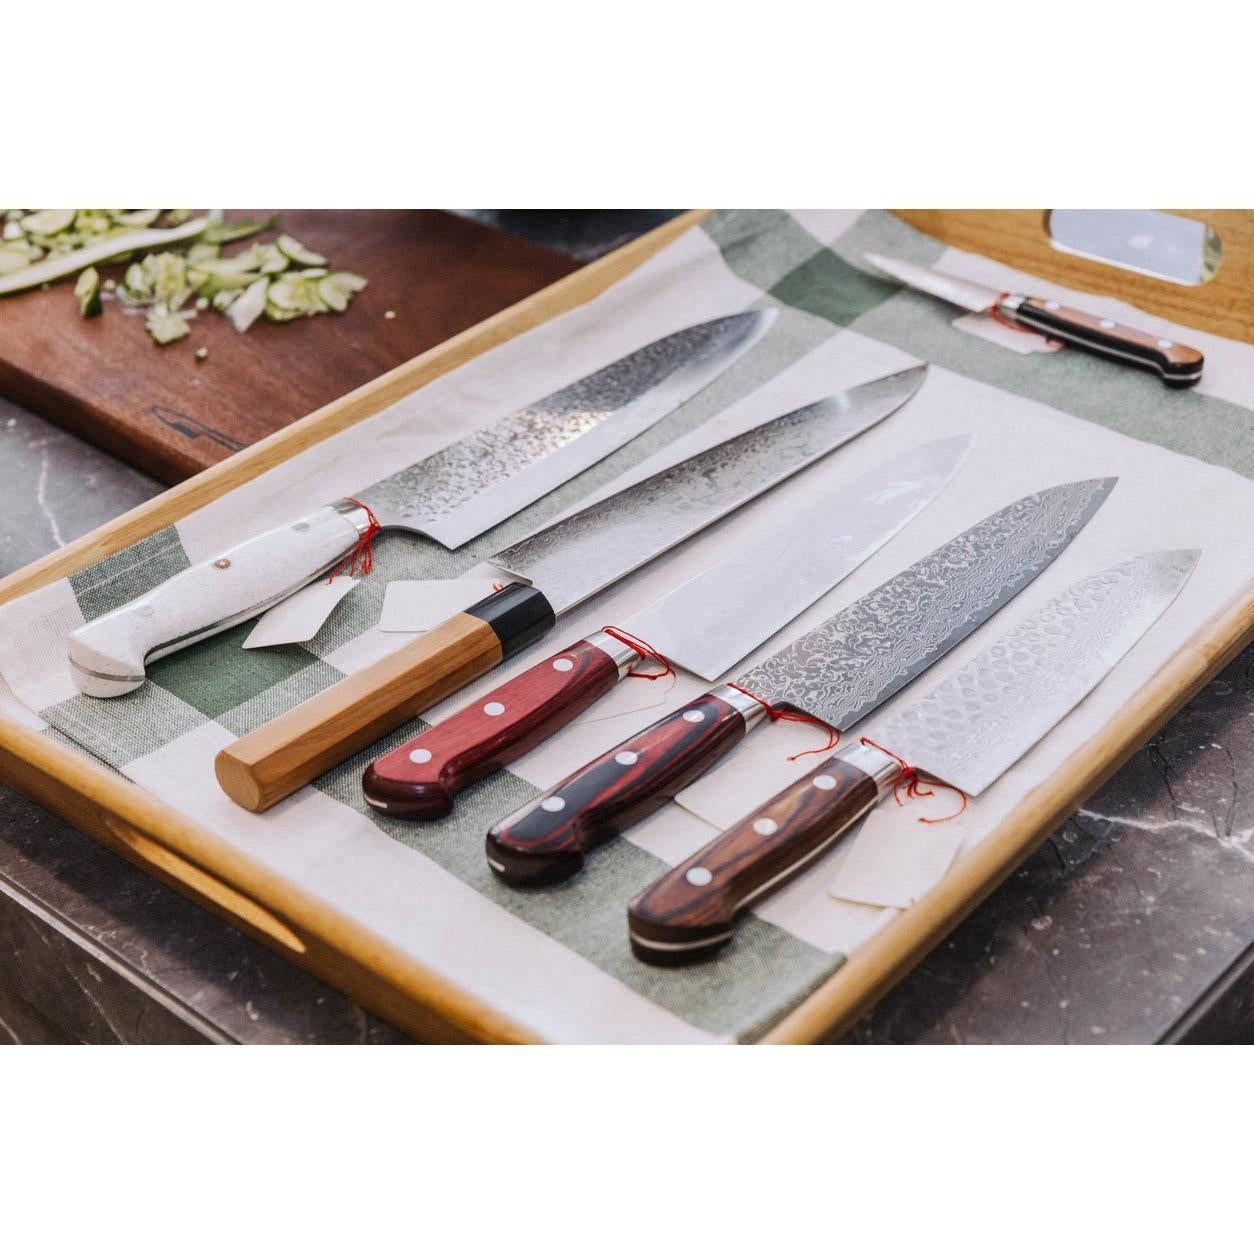 http://japanesetaste.com/cdn/shop/articles/14-types-of-japanese-knives-you-need-to-have-in-your-kitchen-japanese-taste.jpg?v=1694487065&width=5760